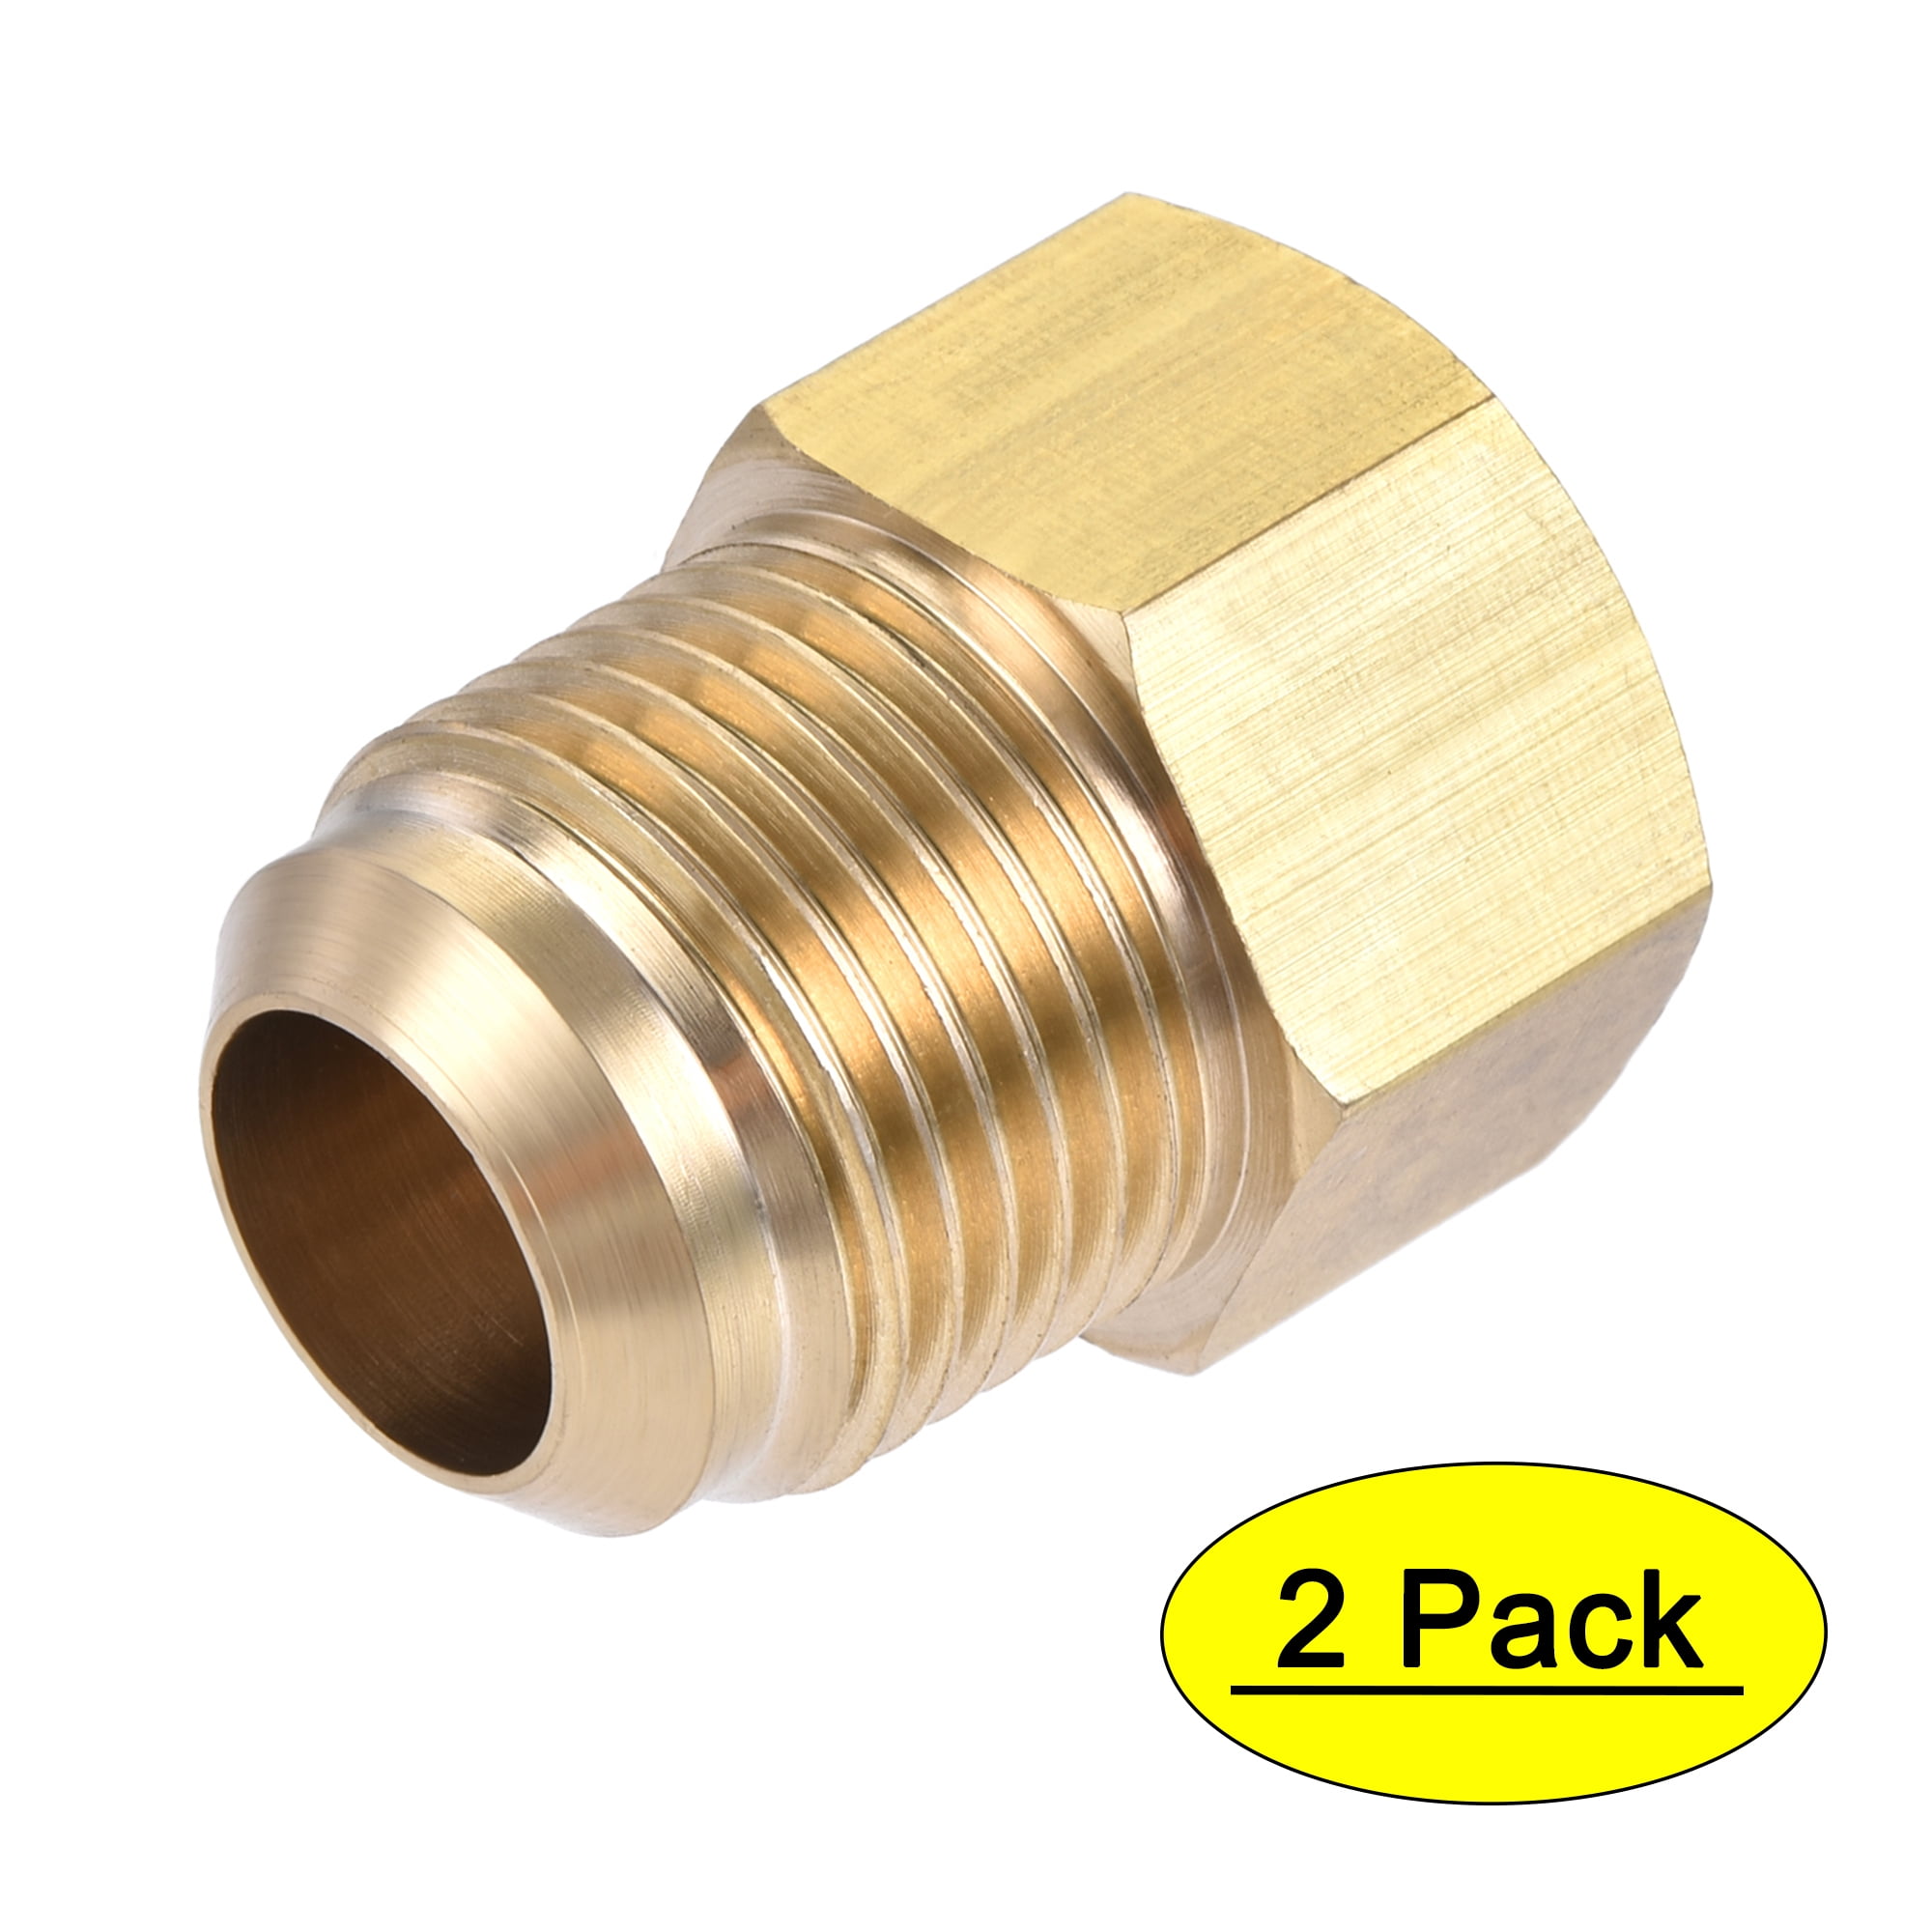 10 PACK 3/4 HOSE BARB ELBOW X 3/4 MALE NPT Brass Pipe Fitting Gas WOG 